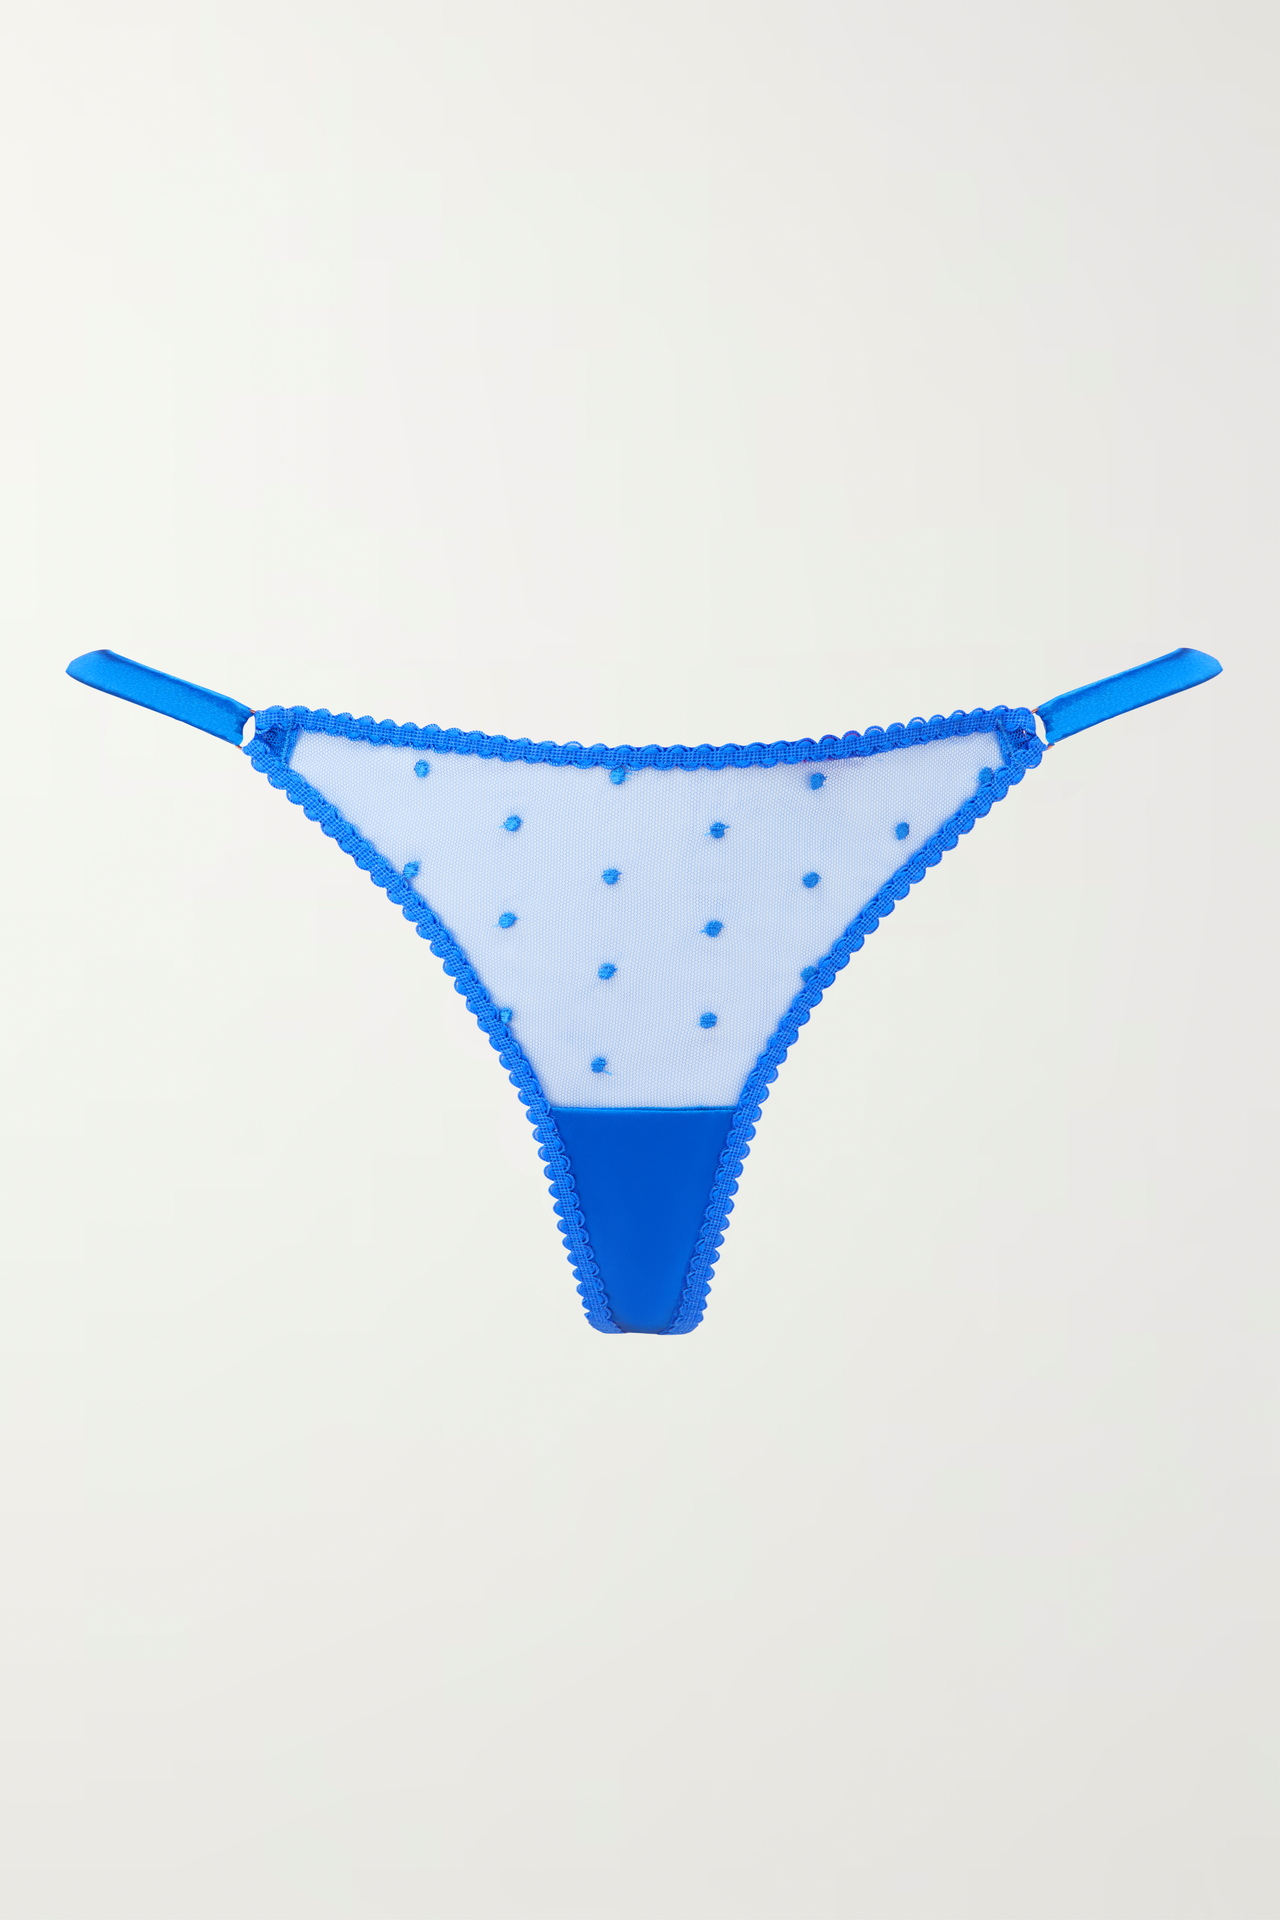 'Don't Call Me Baby' Blue Lace Thong